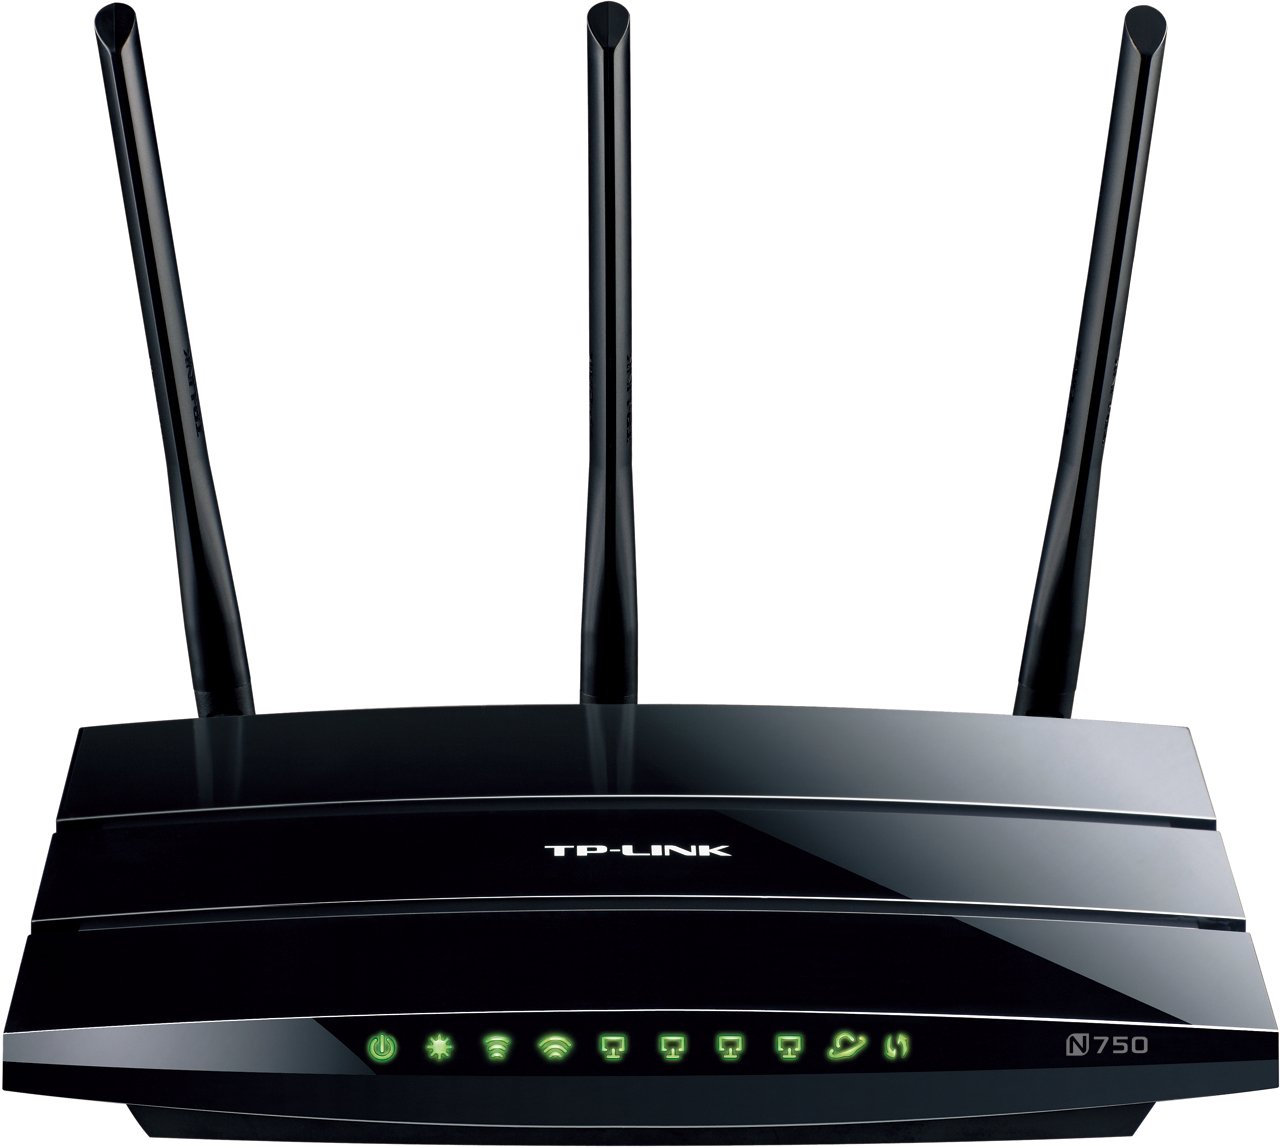 A Wi-Fi router with two bands (2.4 GHz & 5 GHz)